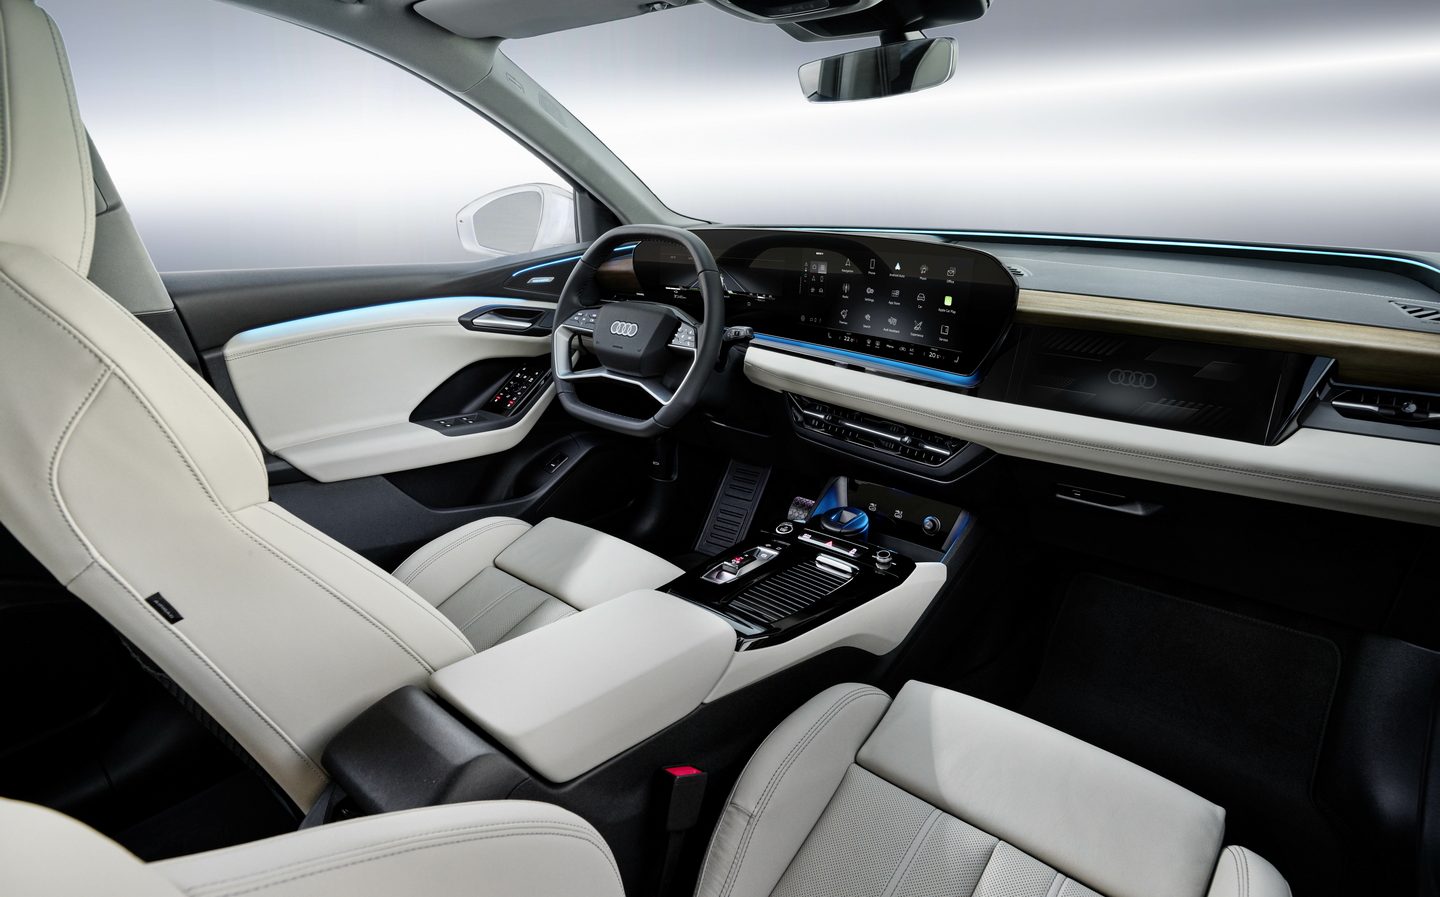 audi, e-tron, electric, interior, oled, touchscreen technology, audi q6 e-tron electric suv gains high-tech interior with extra screen for passenger